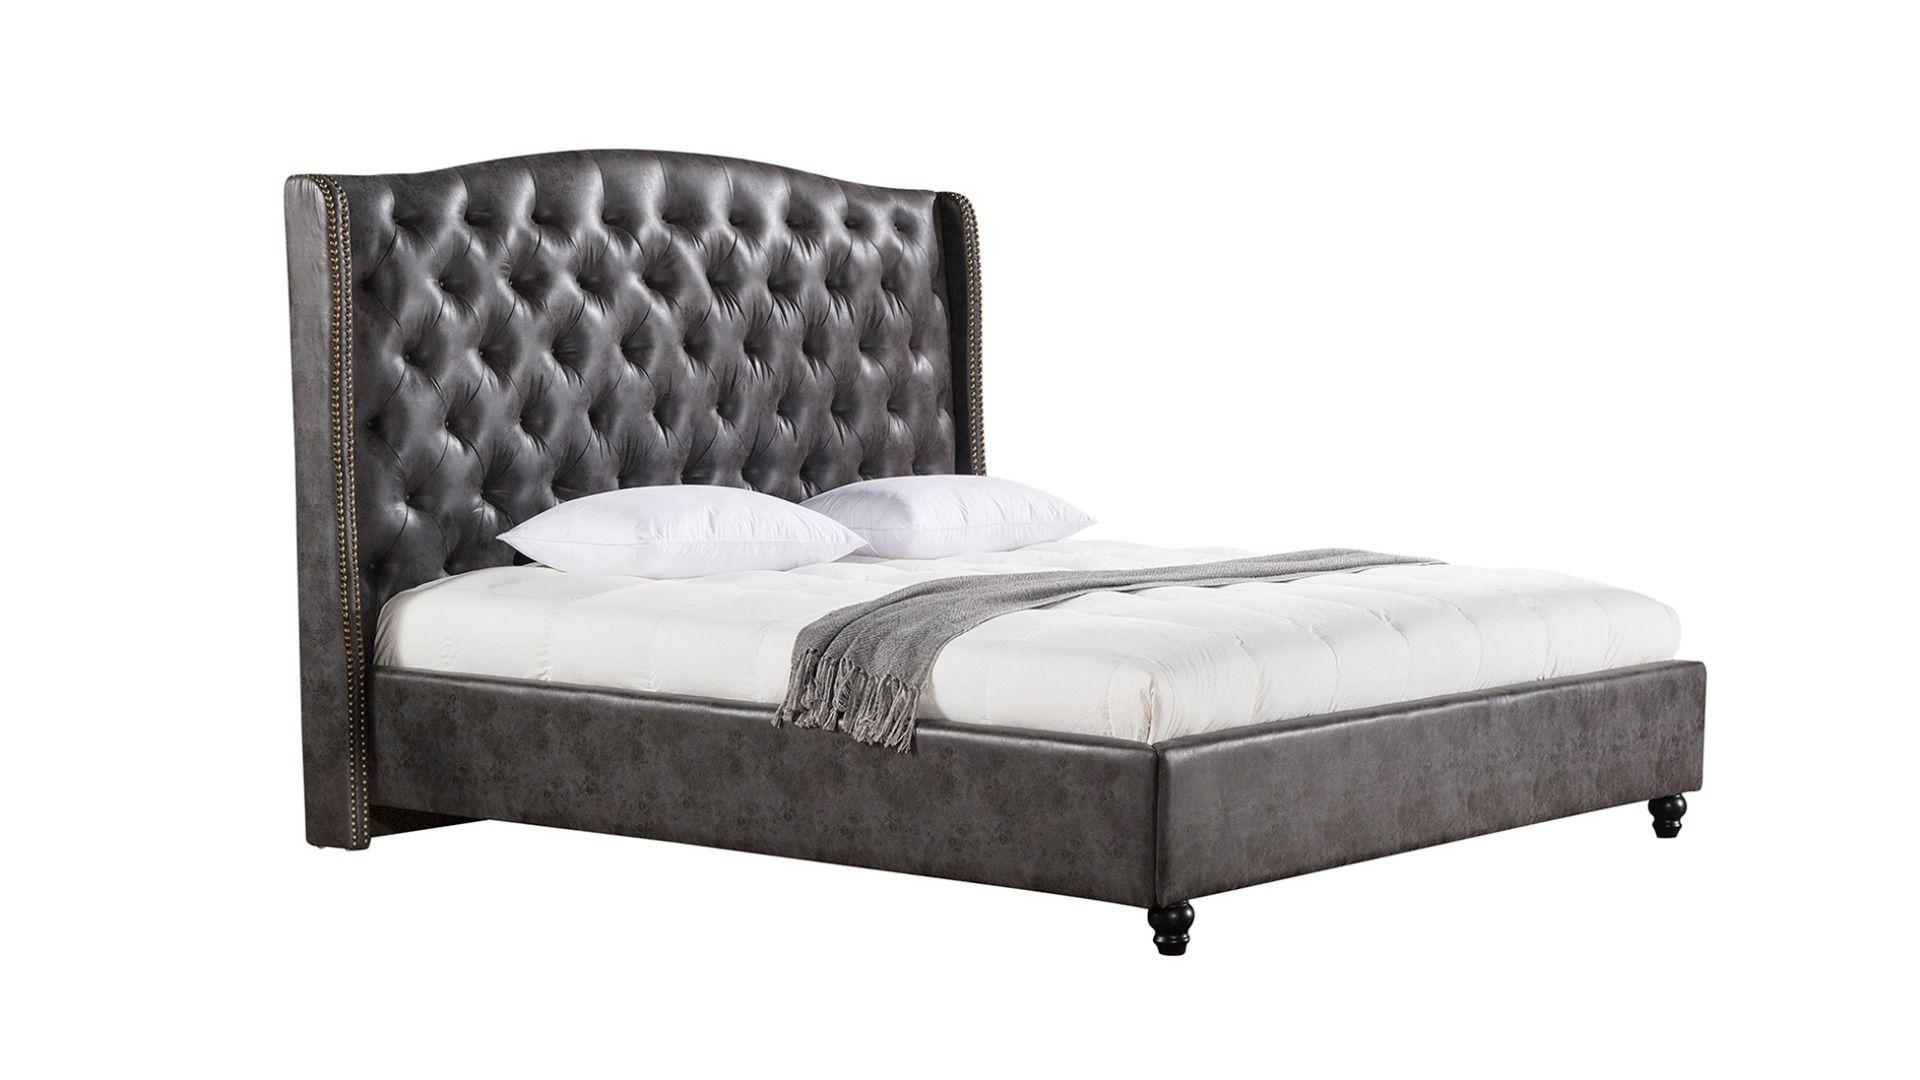 

    
Dark Gray Queen Size Bed Leather Air Fabric Tufted Headboard American Eagle B-D062
